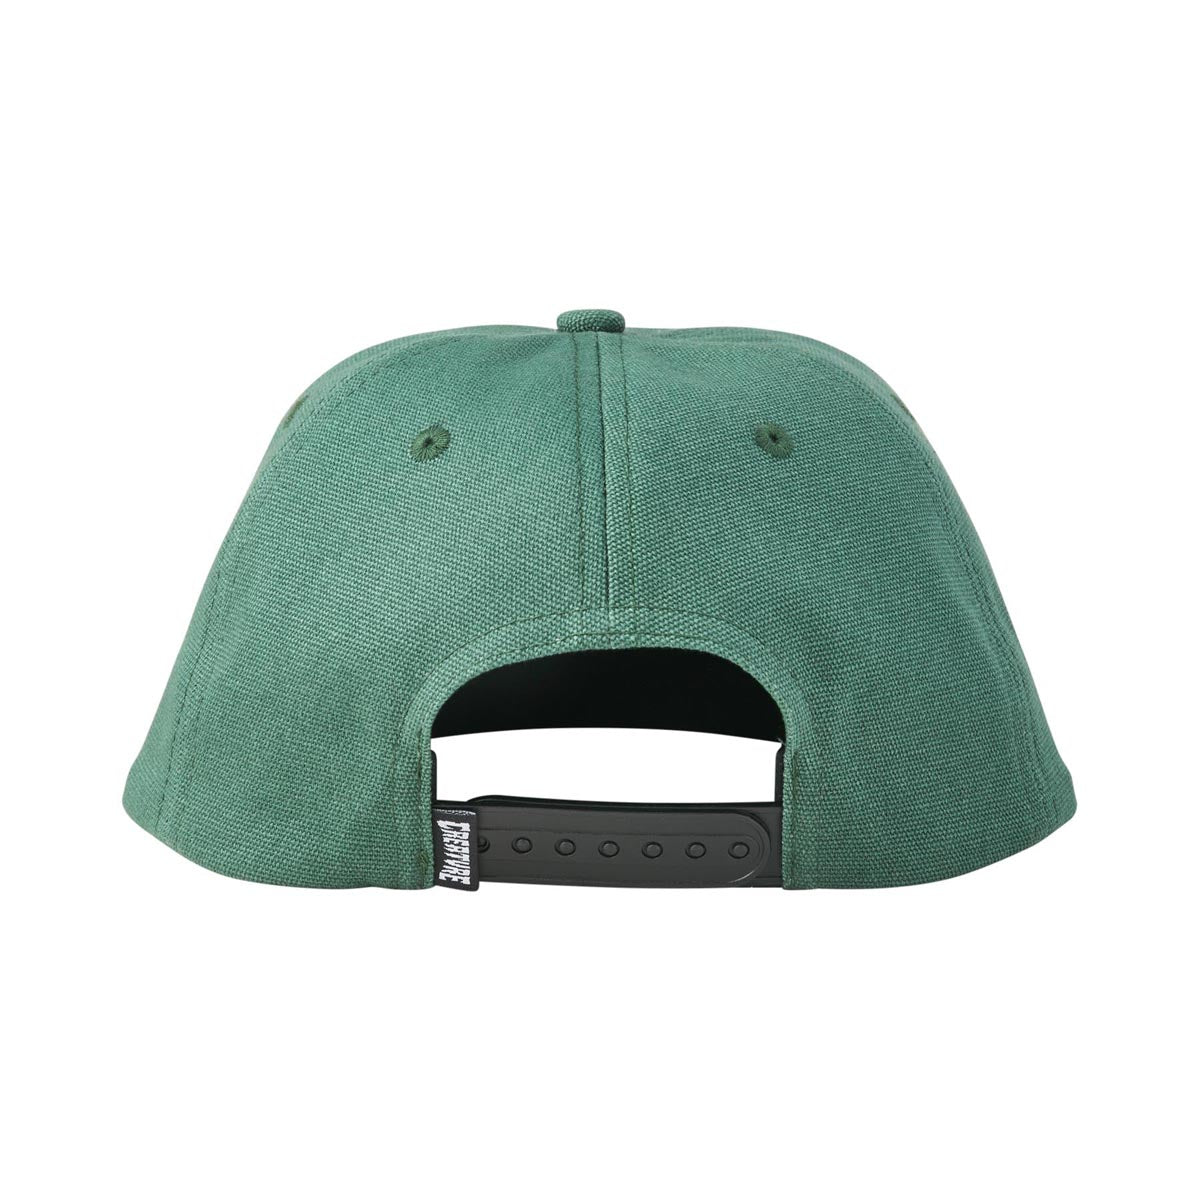 Creature Rolling In The Grave Snapback Hat - Dark Green/Black image 4